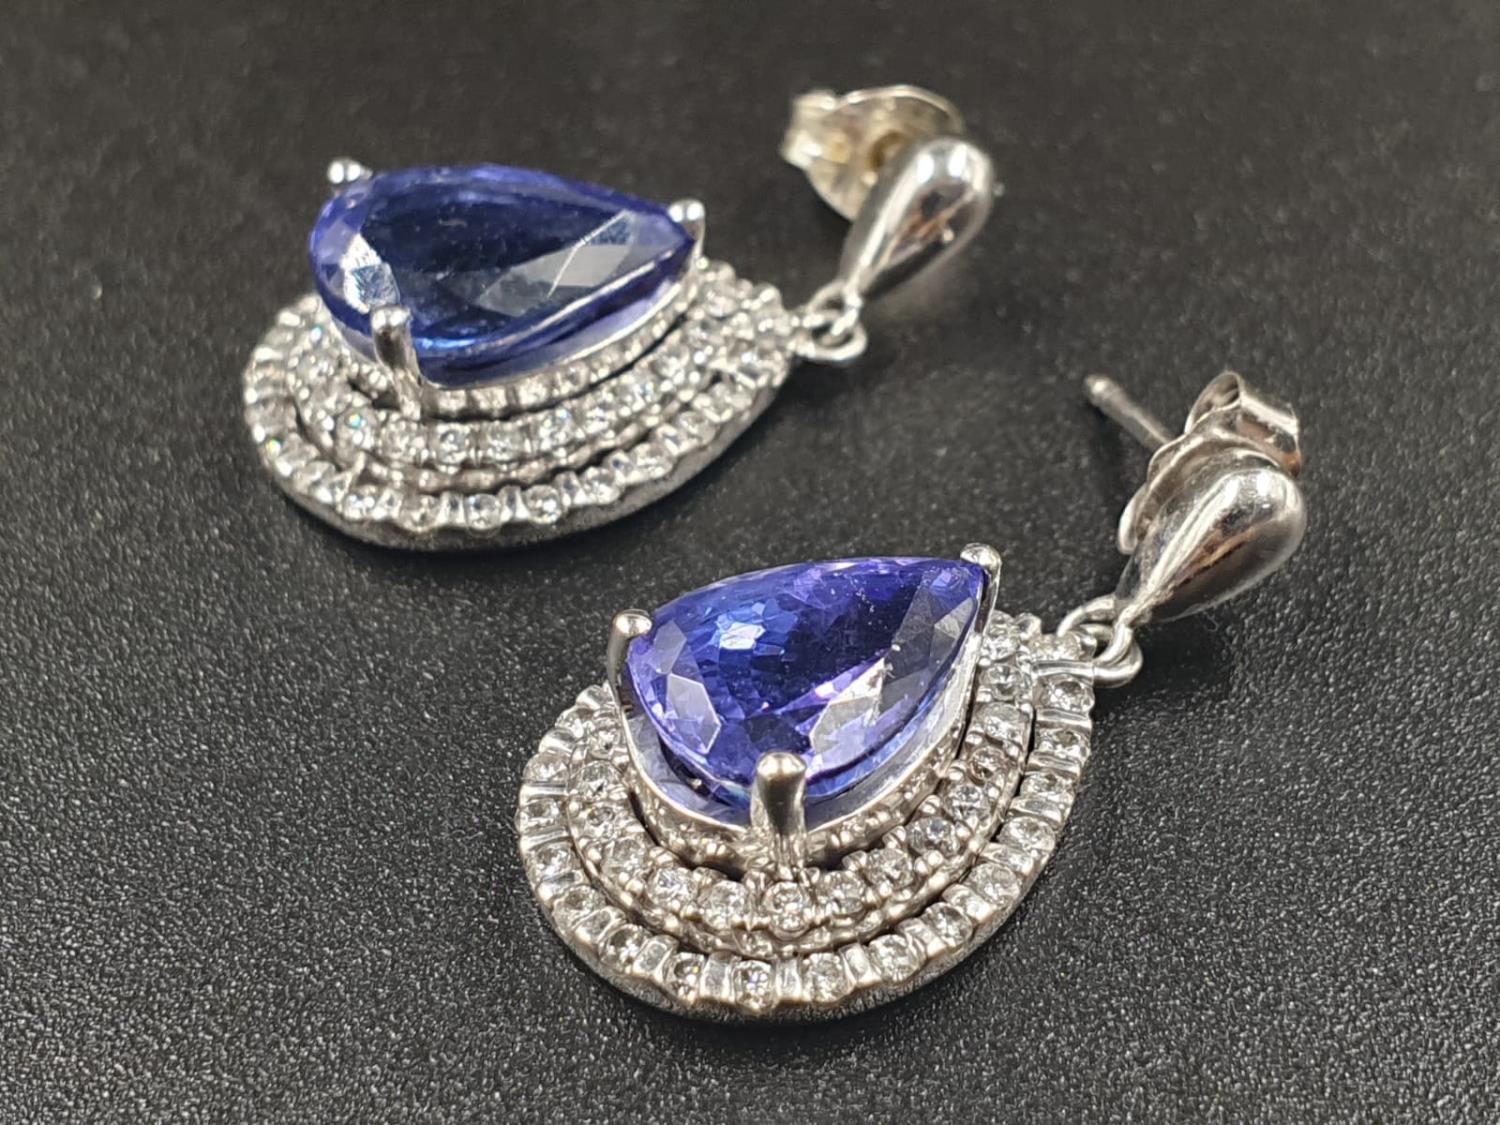 A 14CT WHITE GOLD MATCHING SET OF EARRINGS AND DRESS RING WITH LARGE PEAR SHAPED TANZANITE STONES - Image 8 of 14